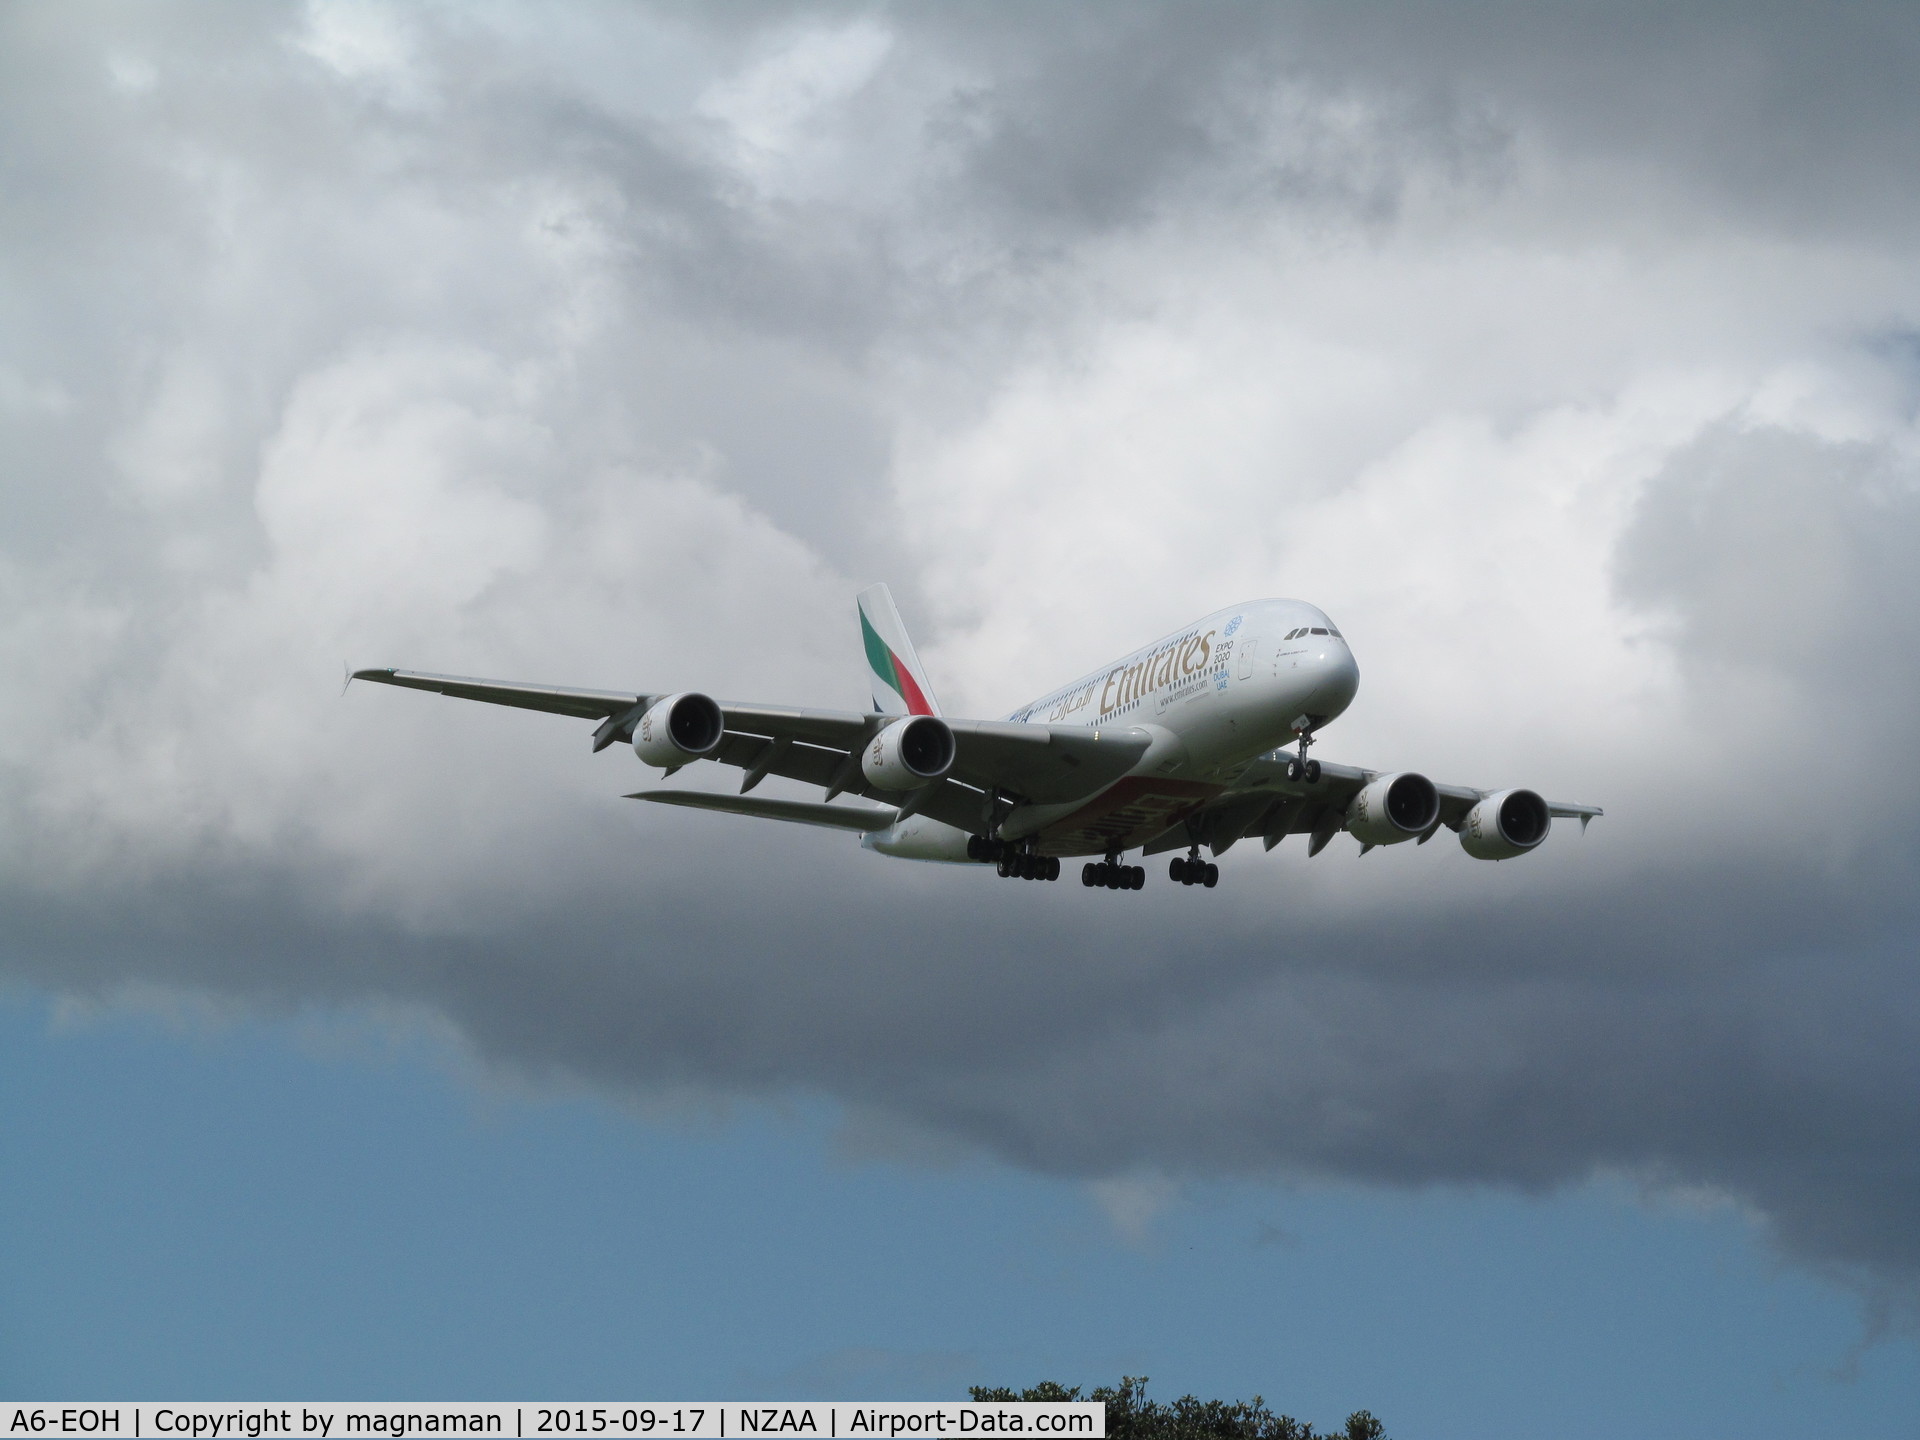 A6-EOH, 2014 Airbus A380-861 C/N 174, on finals to AKL